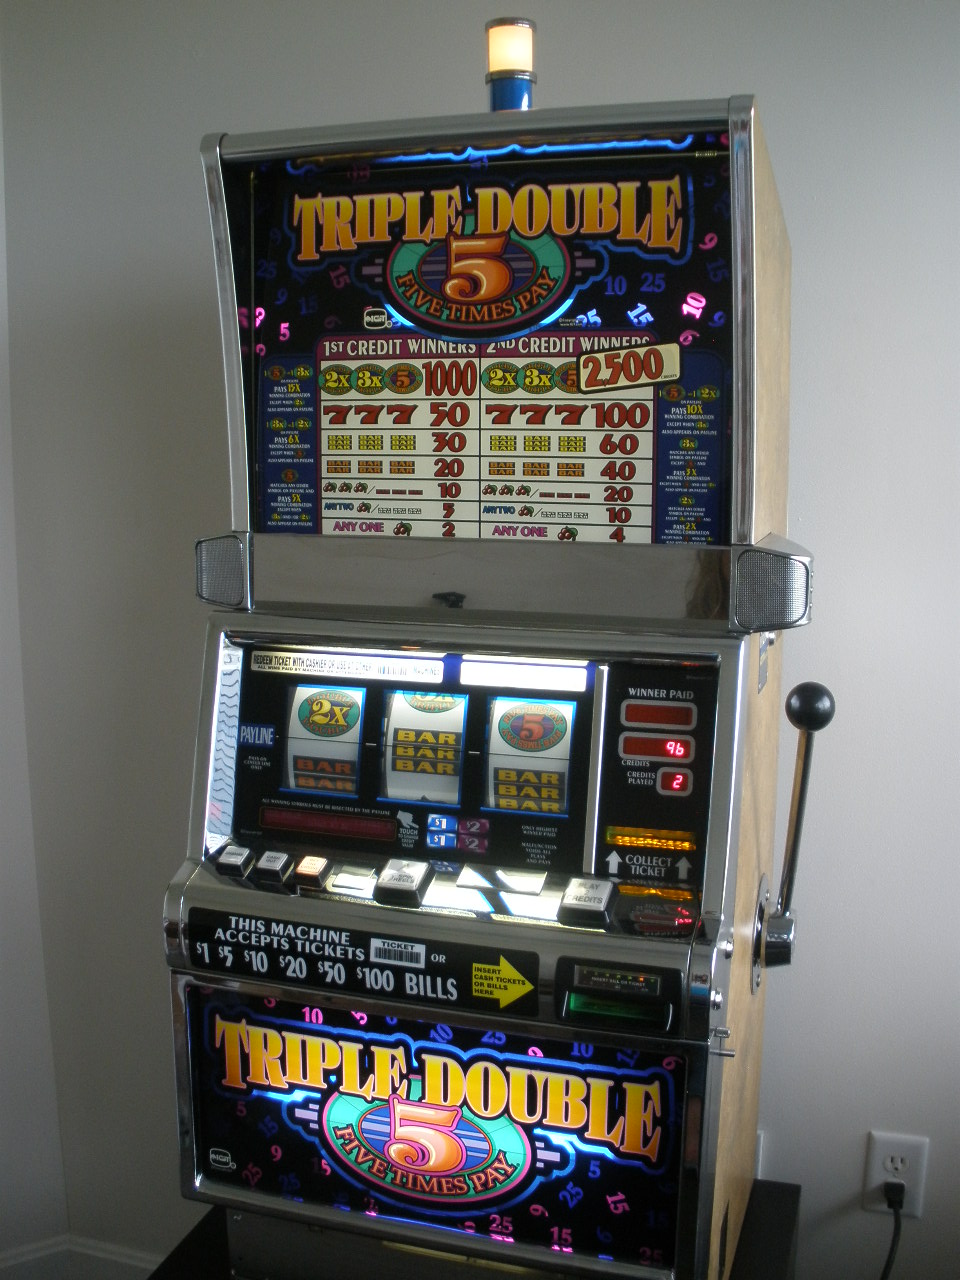 IGT TRIPLE DOUBLE FIVE TIMES PAY S2000 SLOT MACHINE For Sale • Gambler